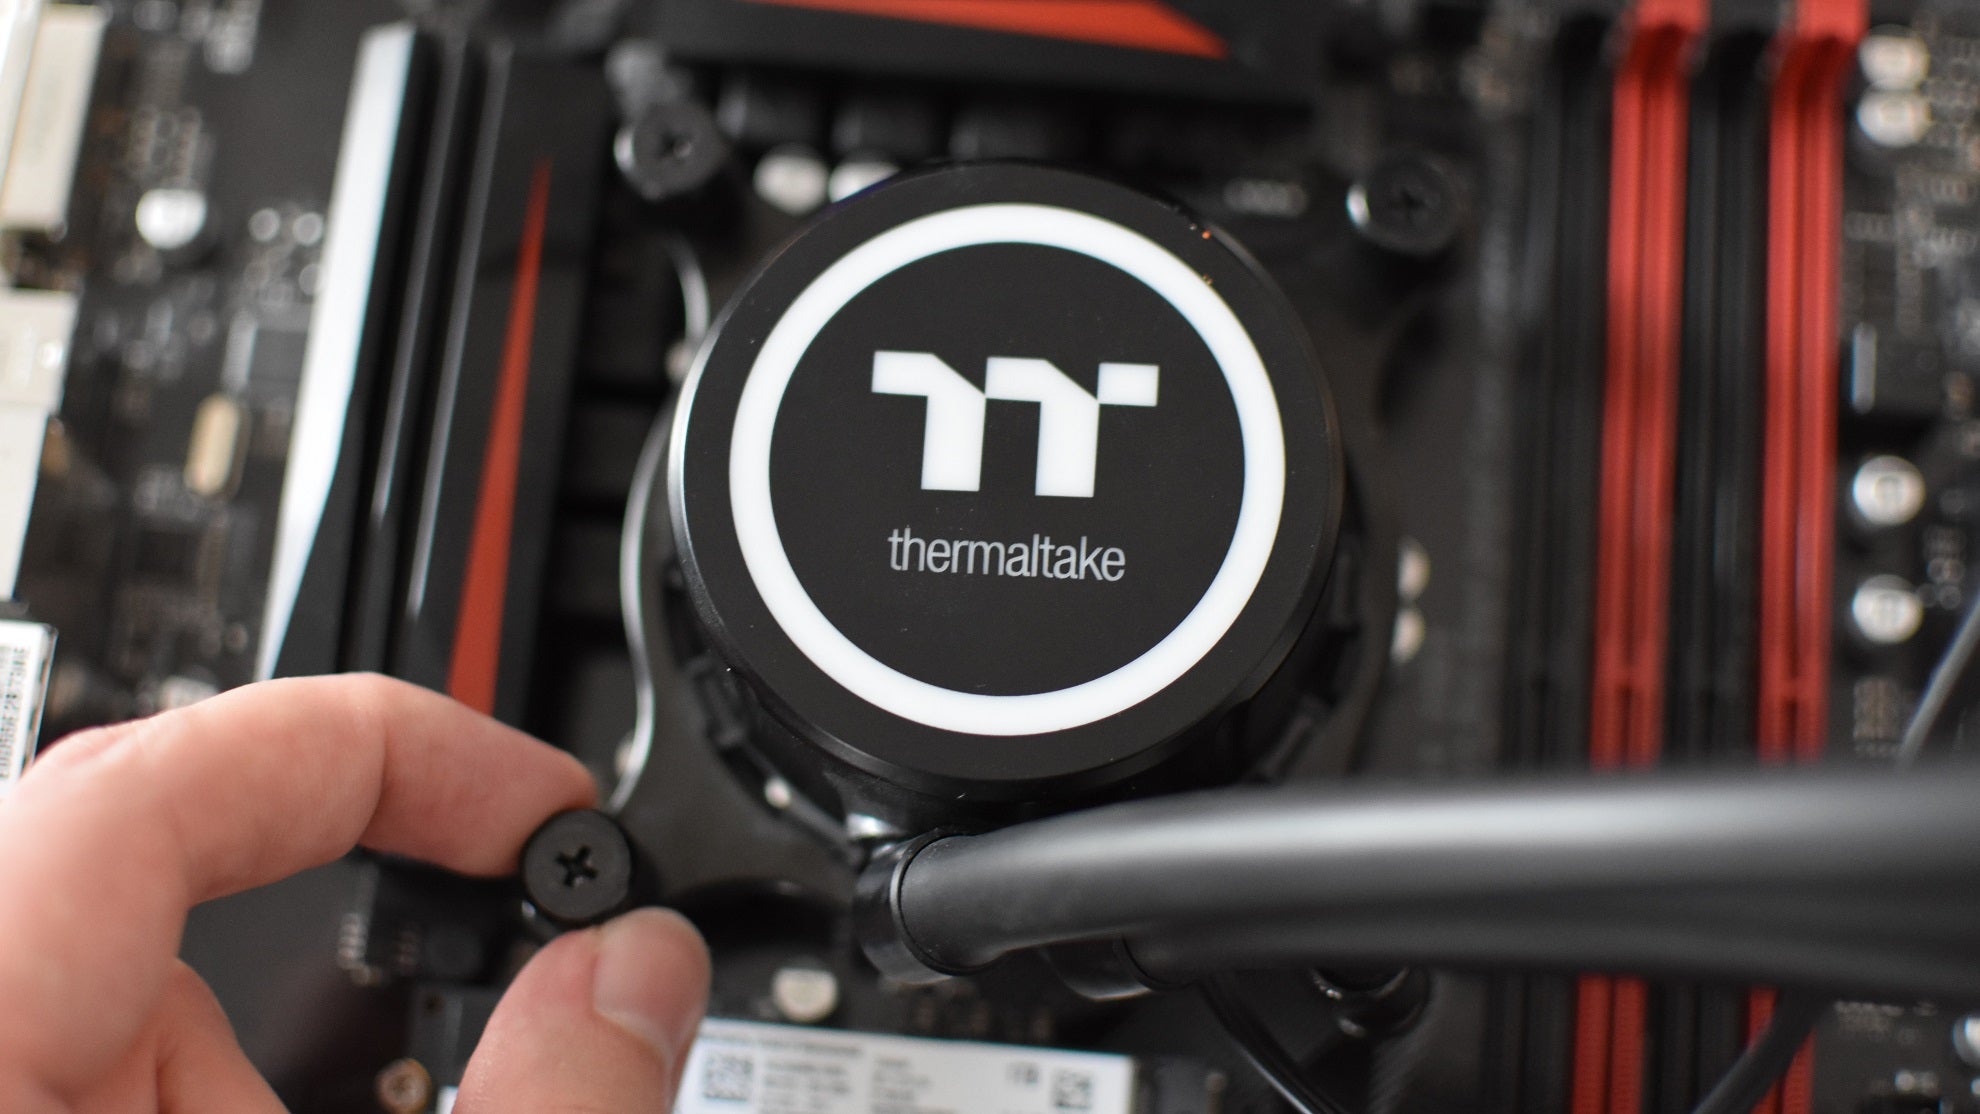 A hand tightens a thumbscrew on the mounting mechanism of a Thermaltake AIO watercooler.